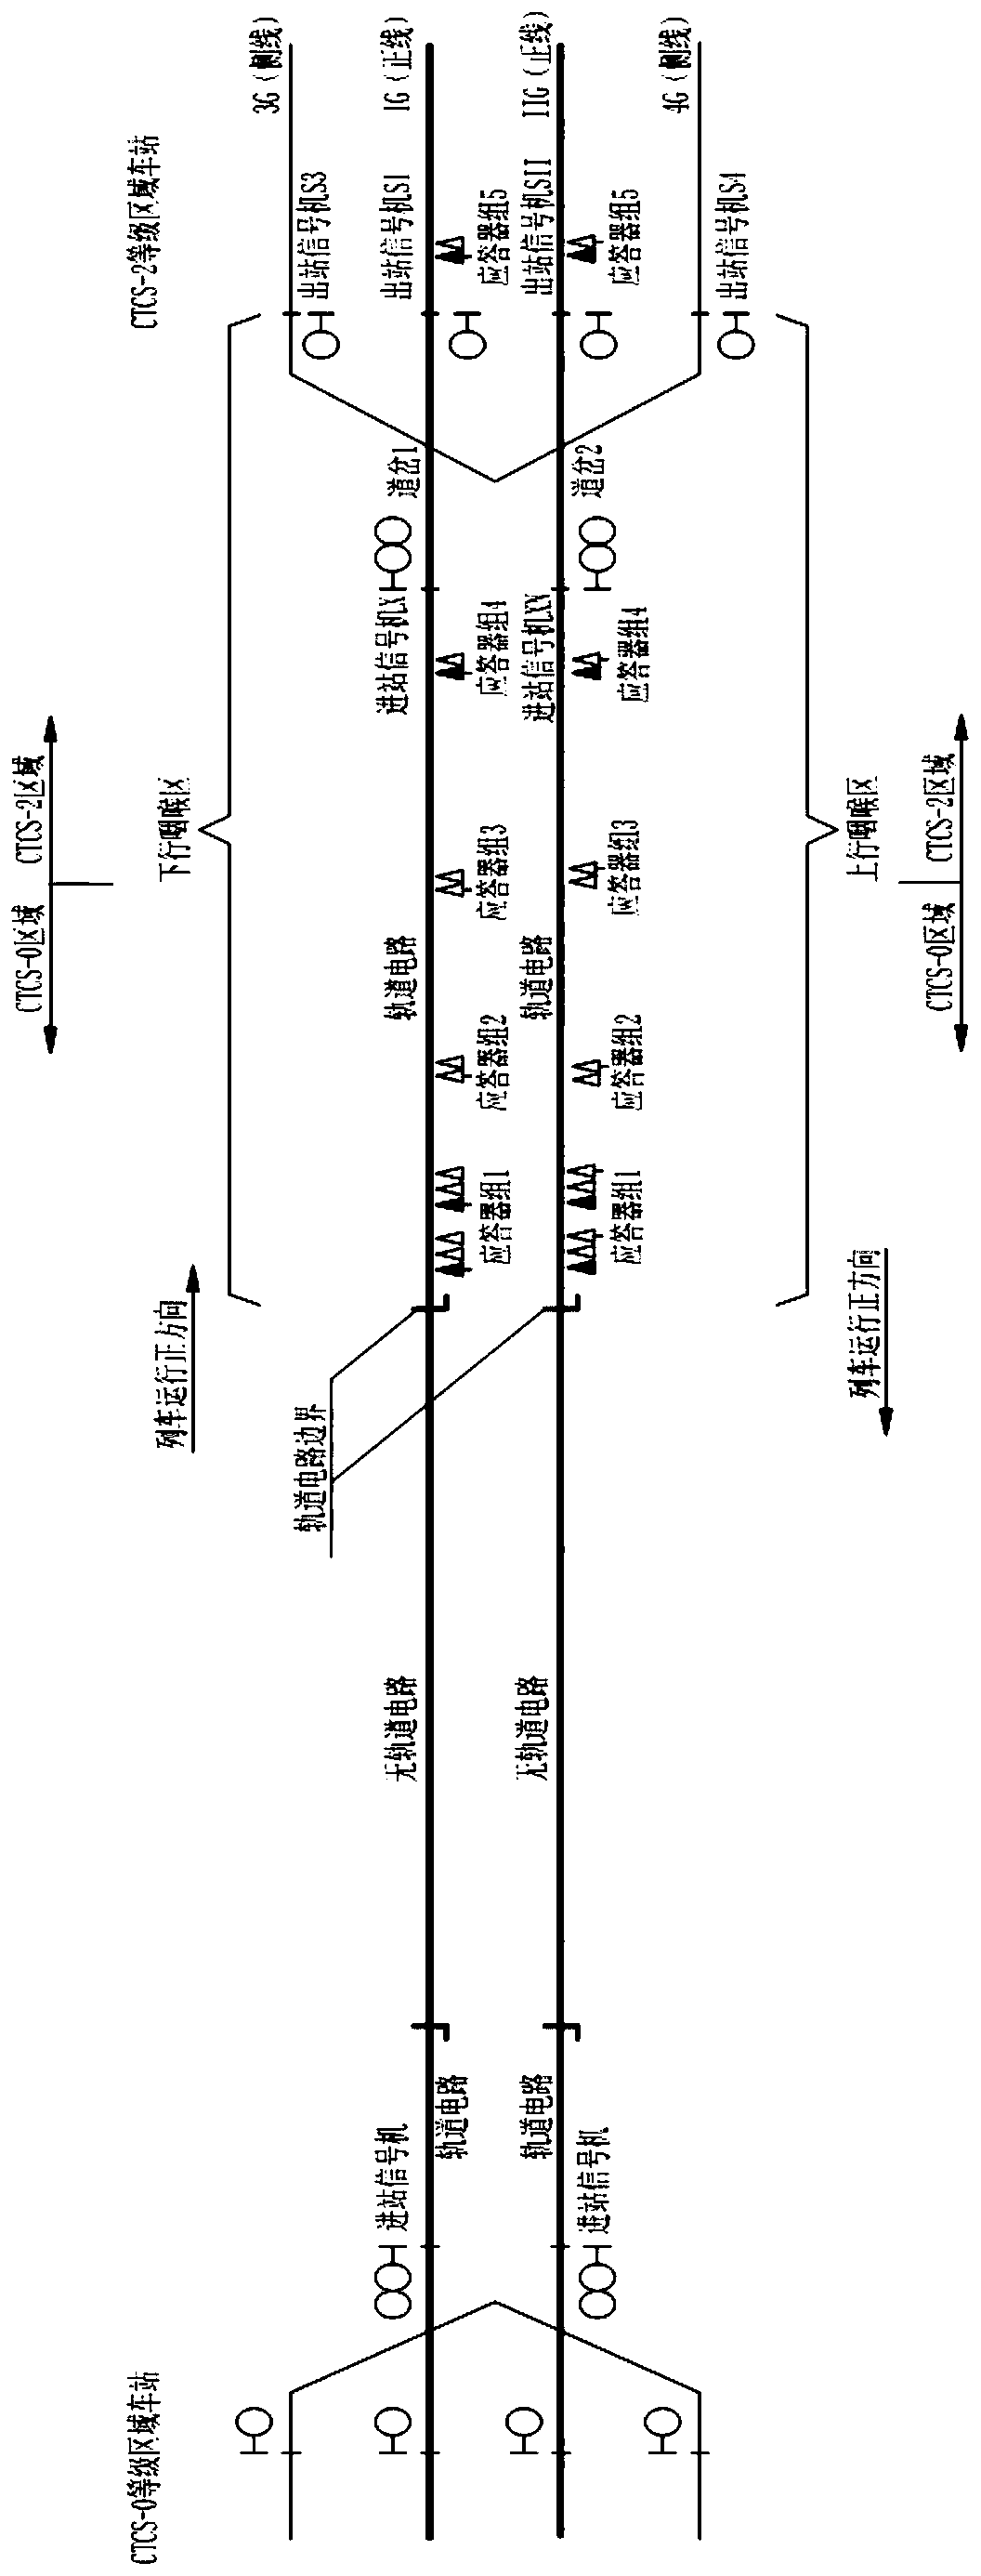 Train control grade transition system and method thereof